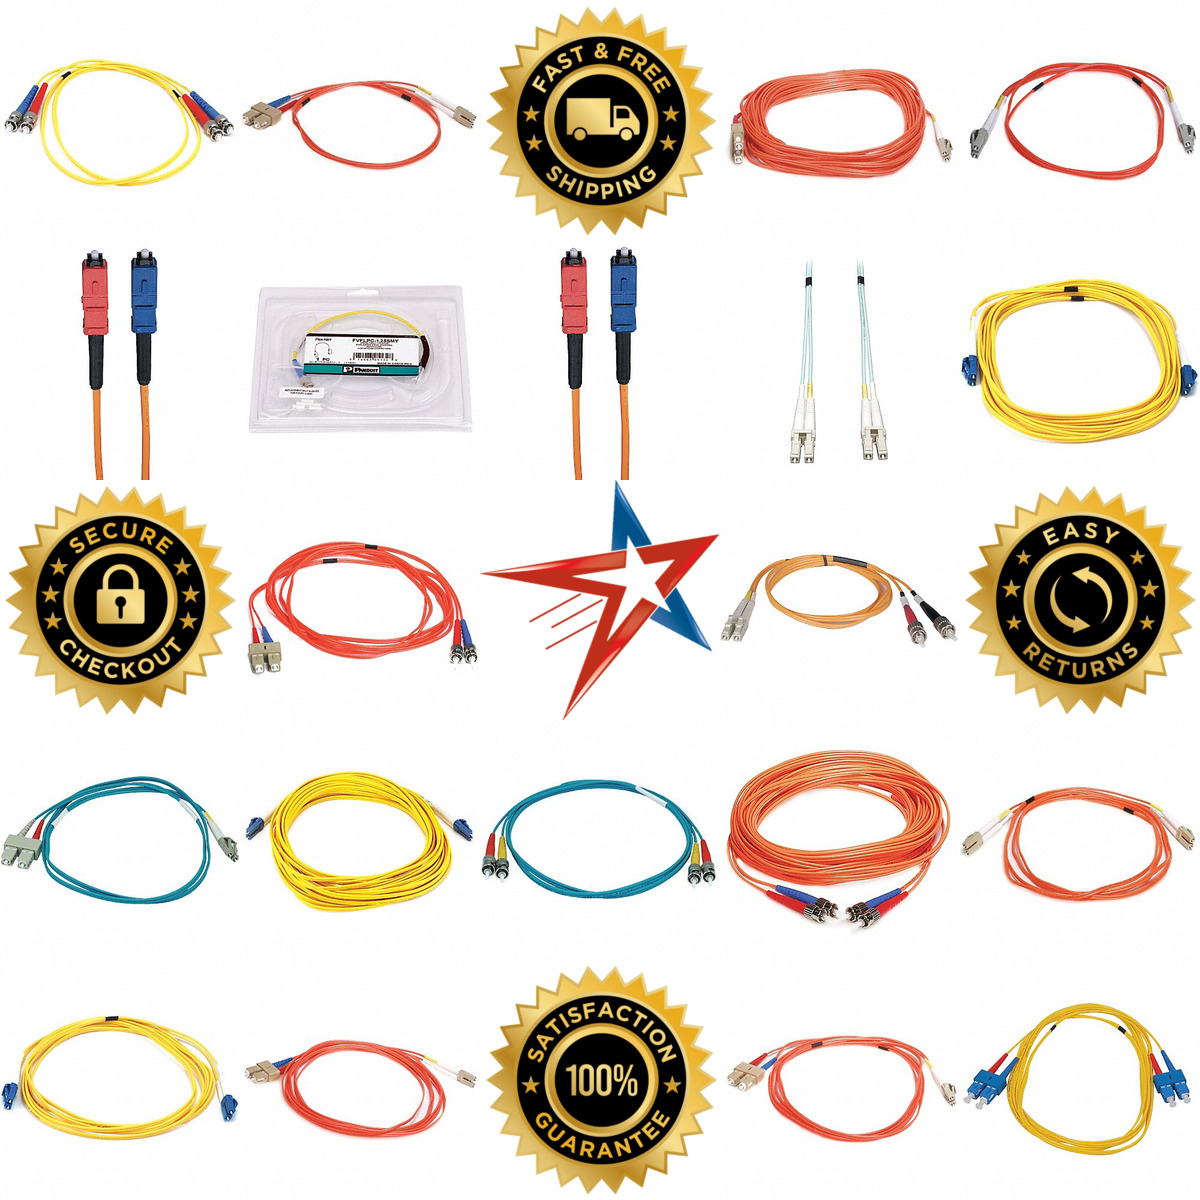 A selection of Fiber Optic Patch Cords products on GoVets